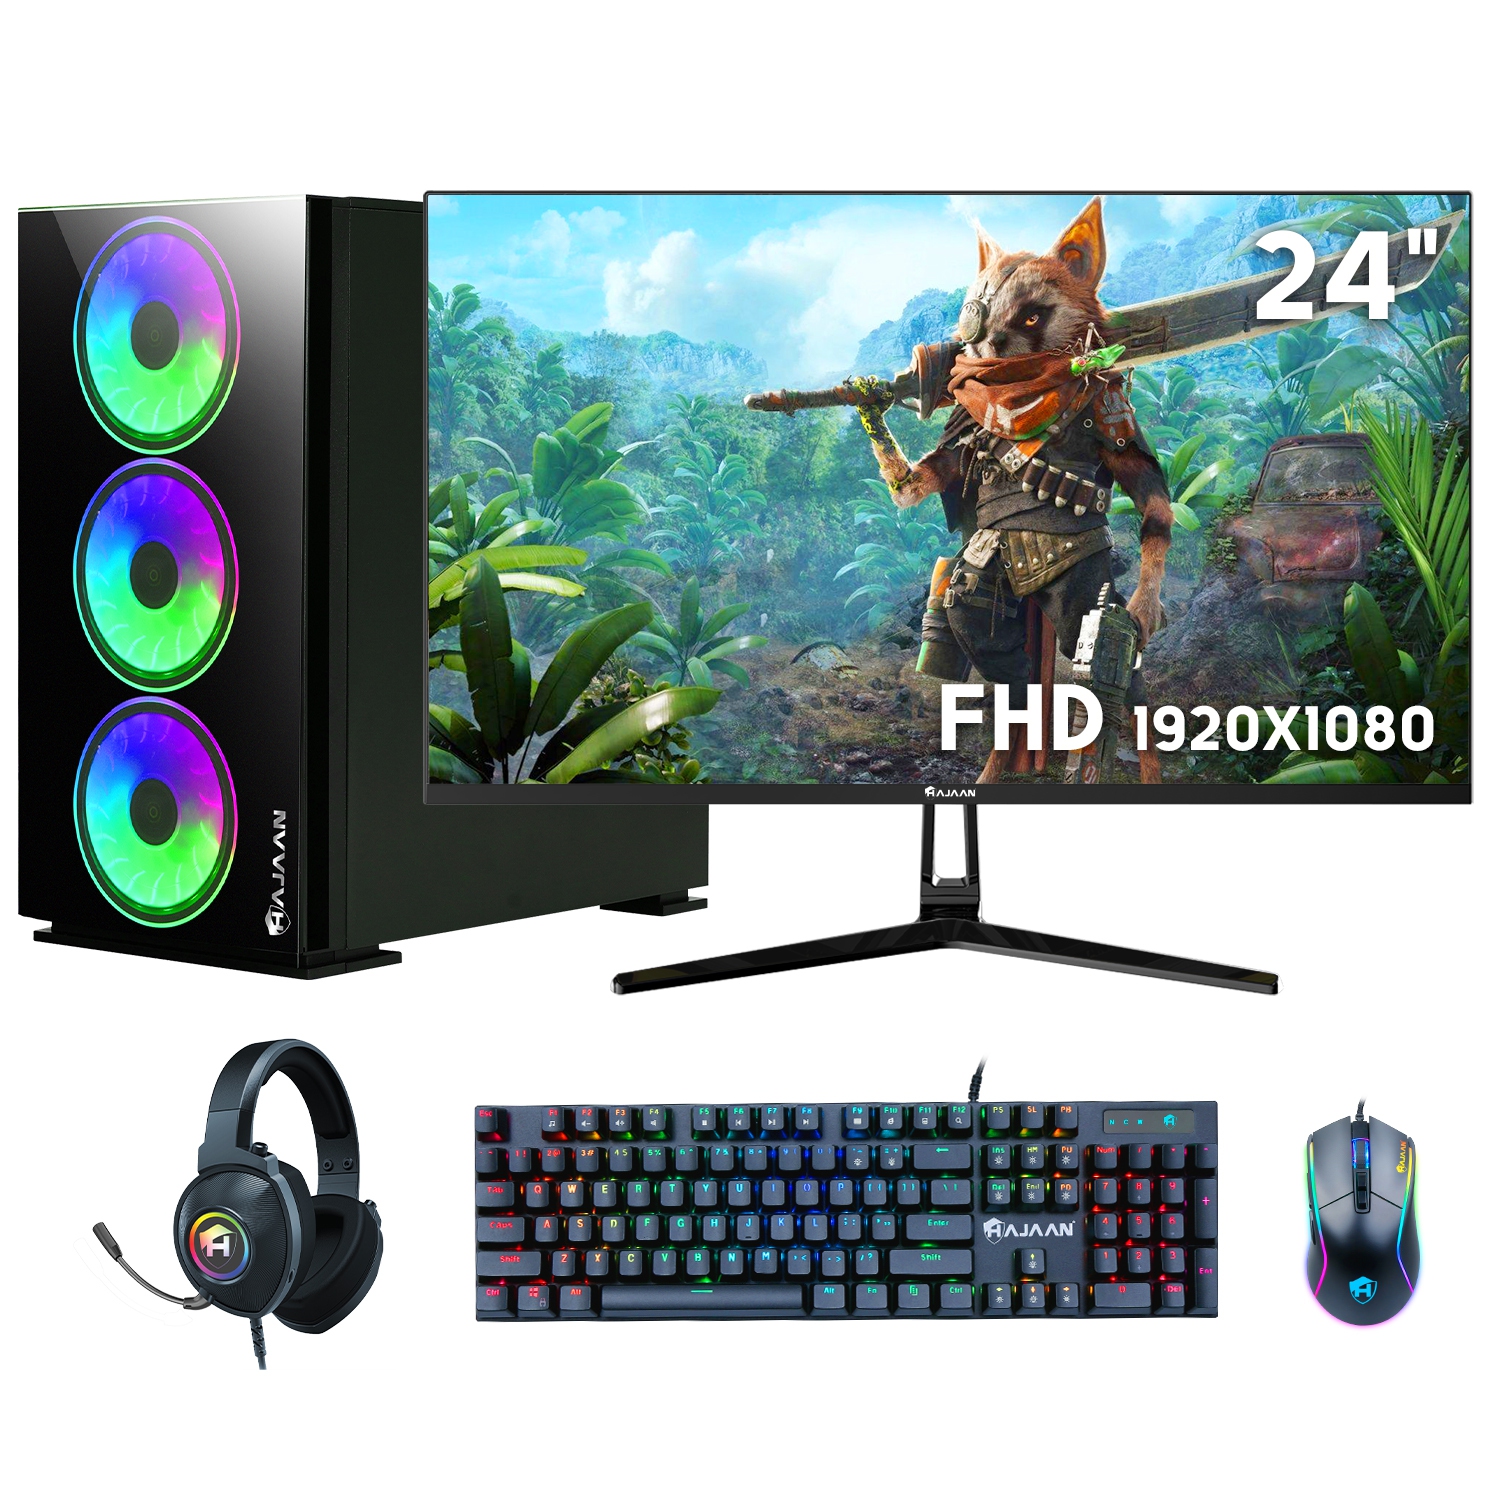 Refurbished (Excellent) Gaming PC Desktop Tower, Intel Core i7 3.6GHz, GeForce GTX 1650 4G, 32GB RAM 1TB SSD, 24″ Gaming Monitor, RGB Keyboard Mouse, WiFi Ready, Windows 10 Pro